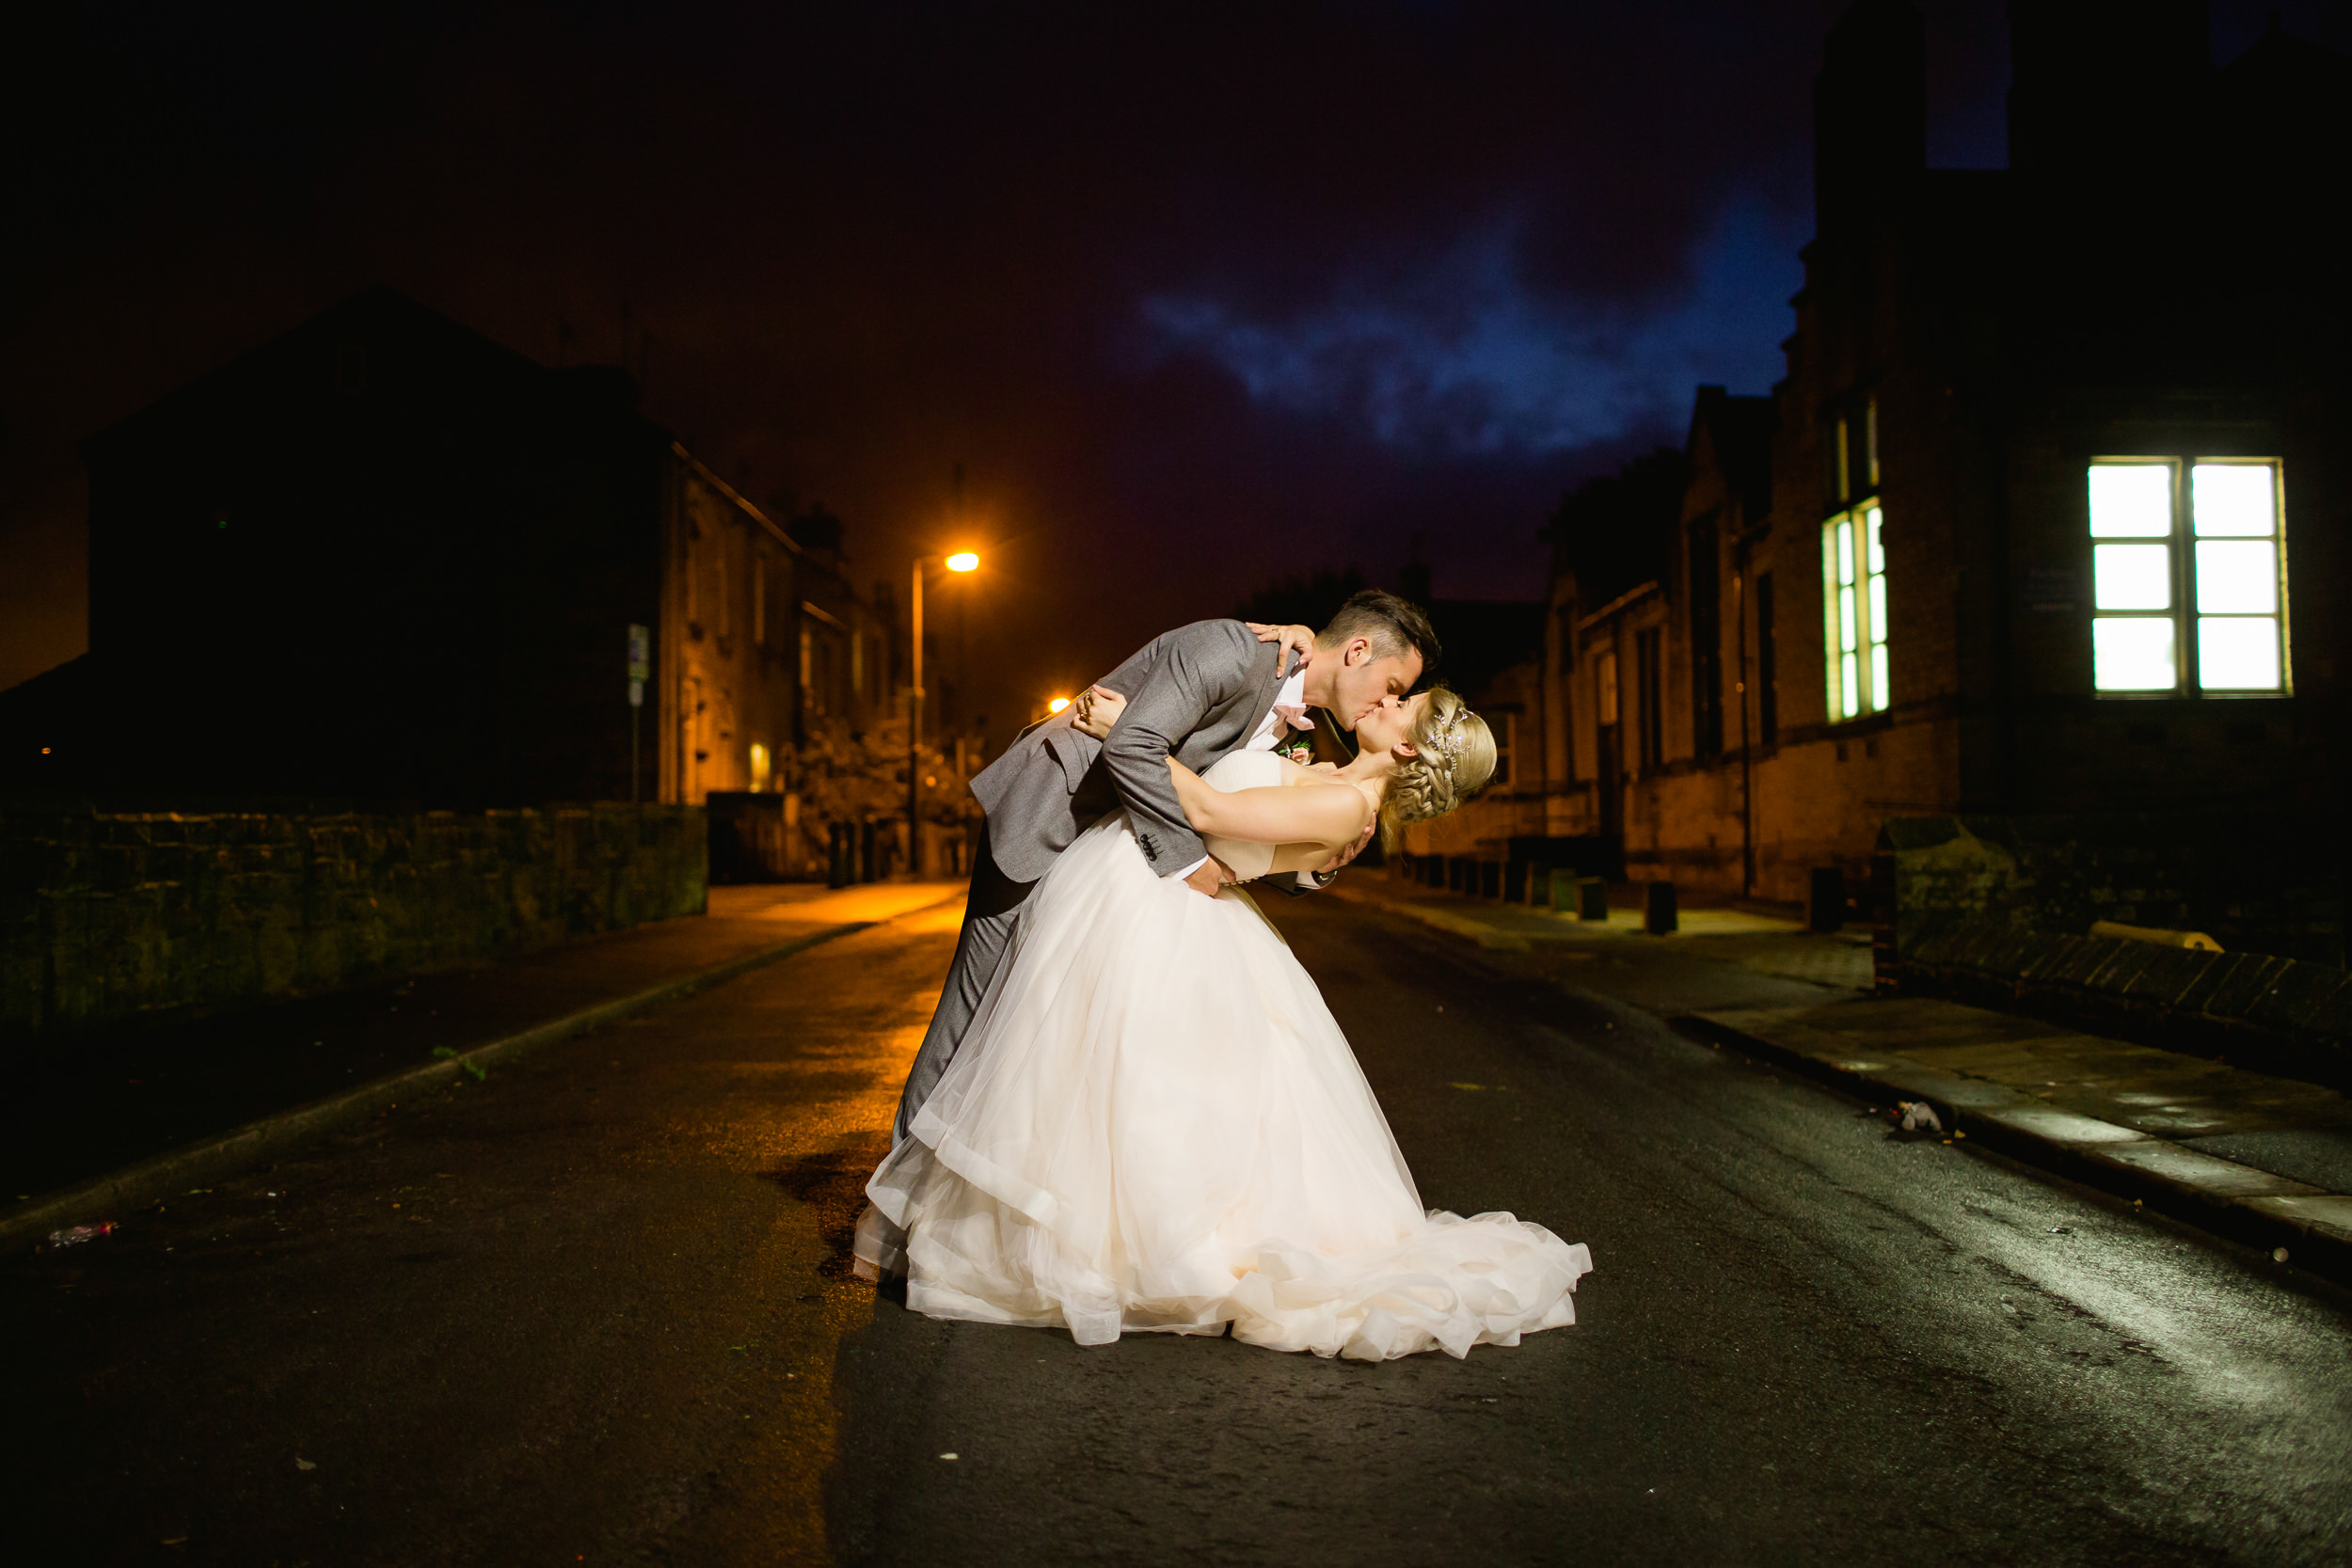 night time pictures at a wedding - wedding pictures - romantic urban wedding - Yorkshire wedding 